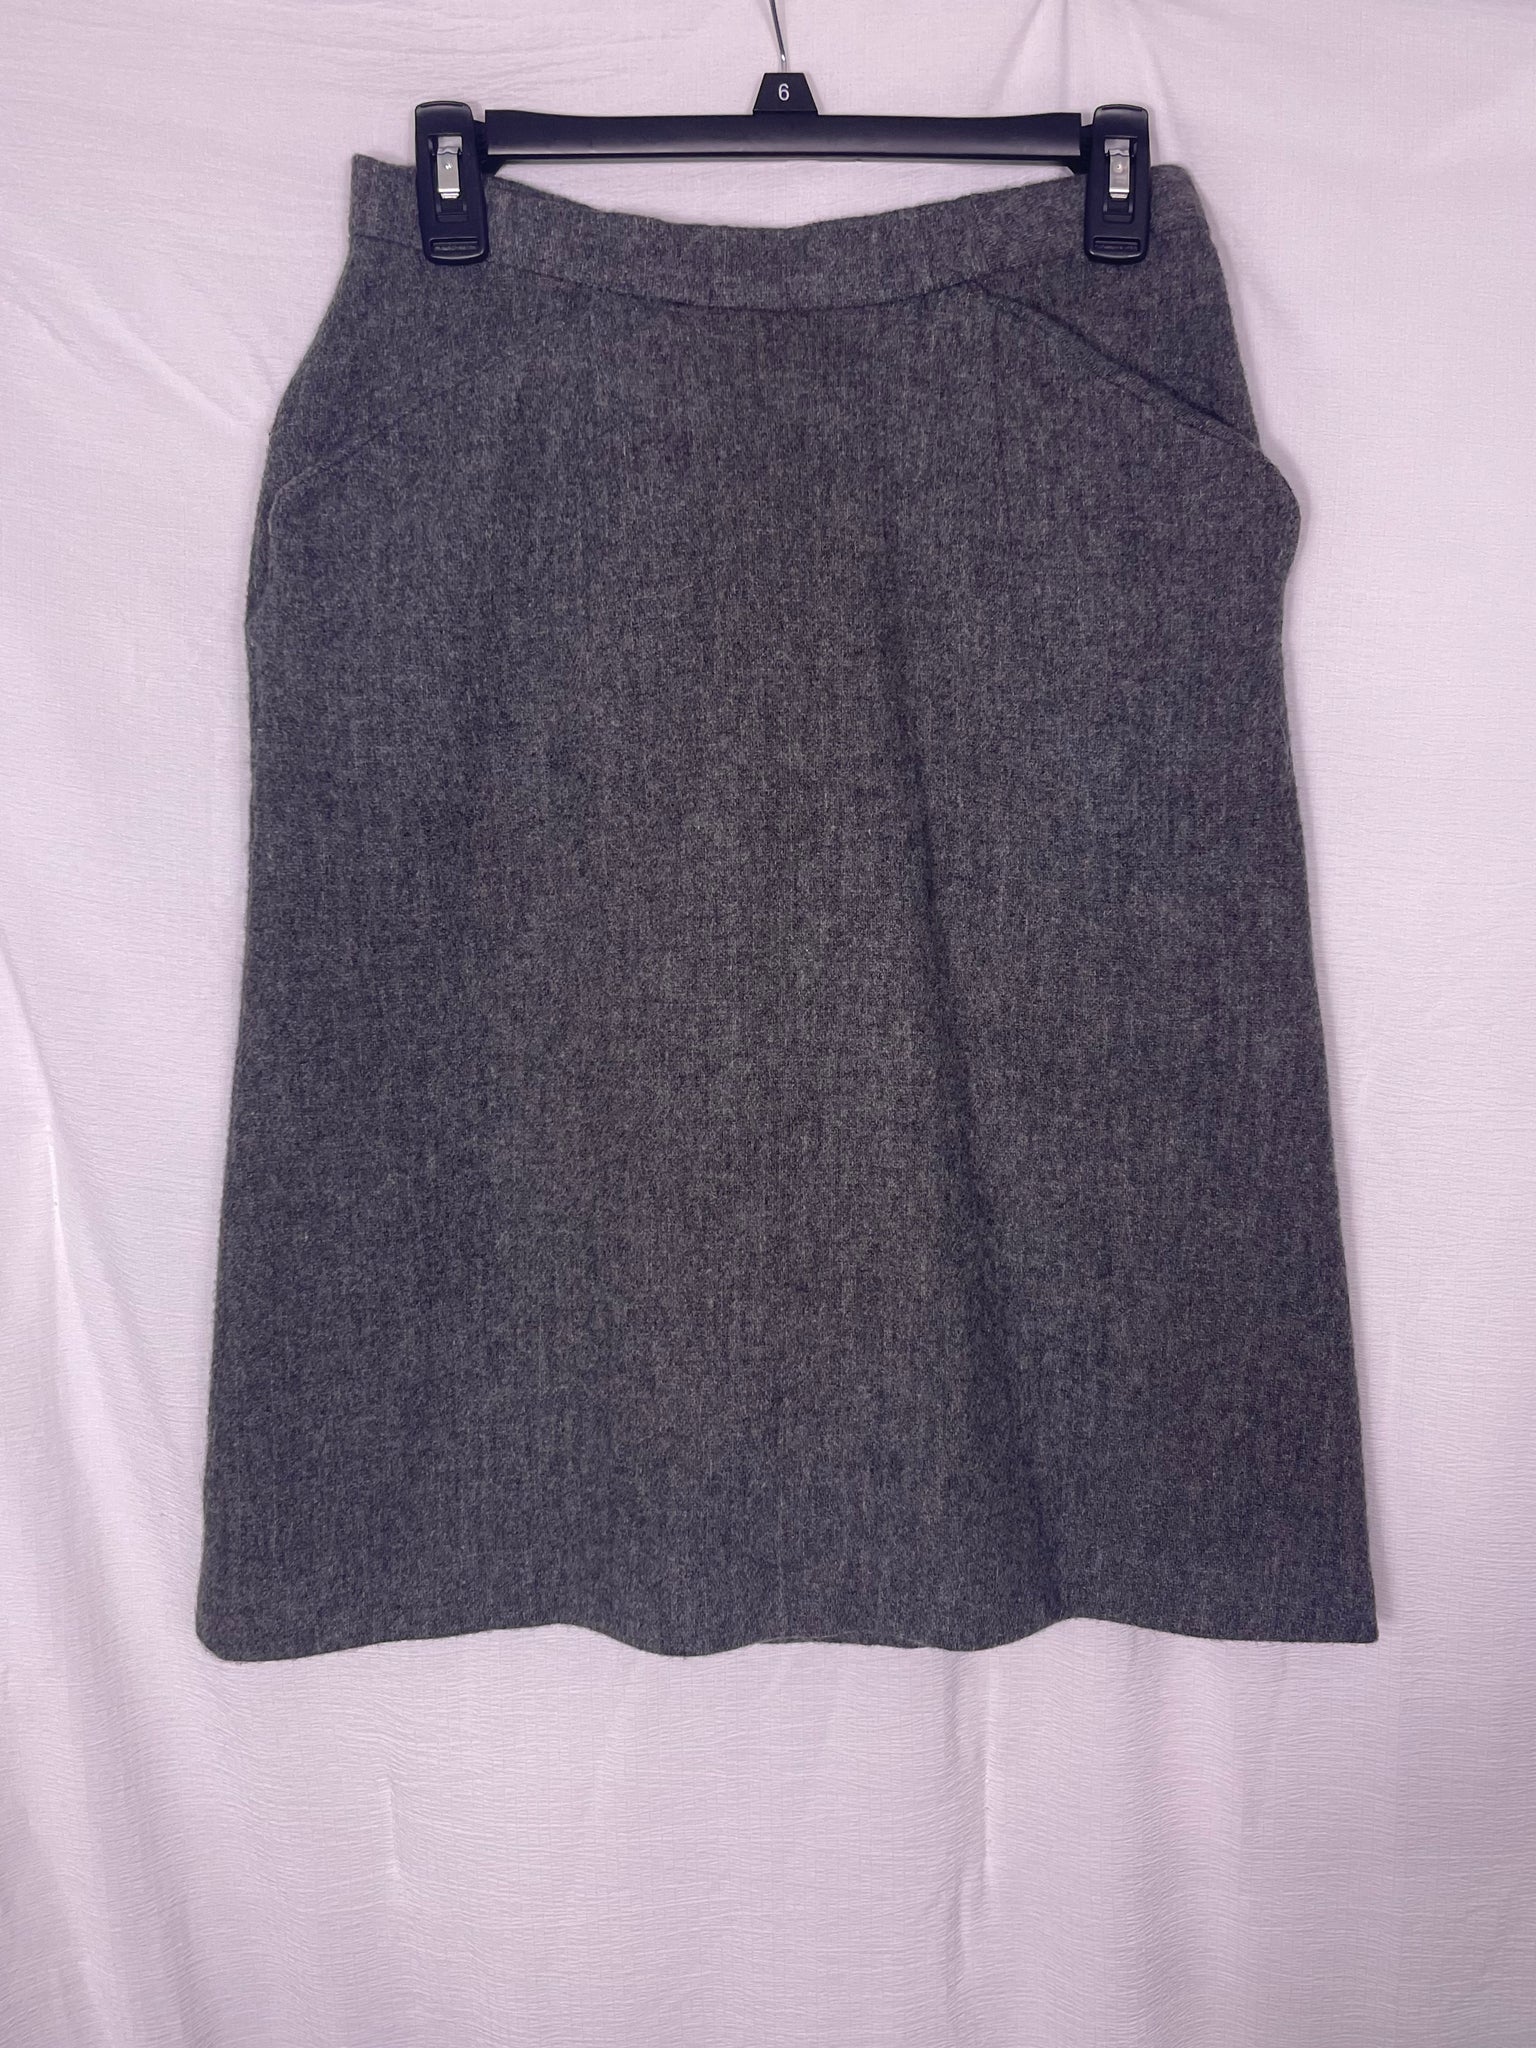 60s gray wool pencil skirt, Size M